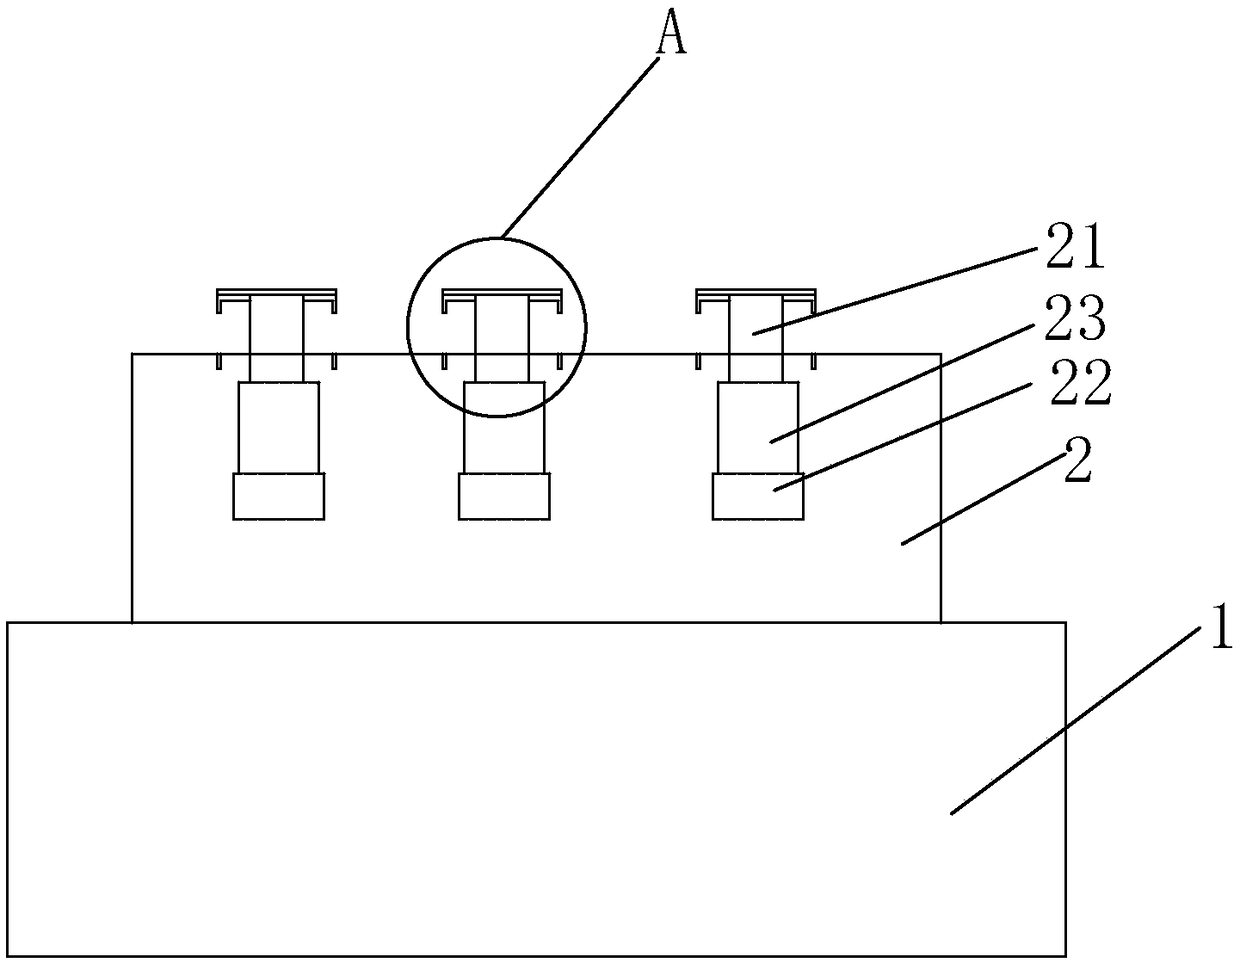 Novel wire winding device for power adapter